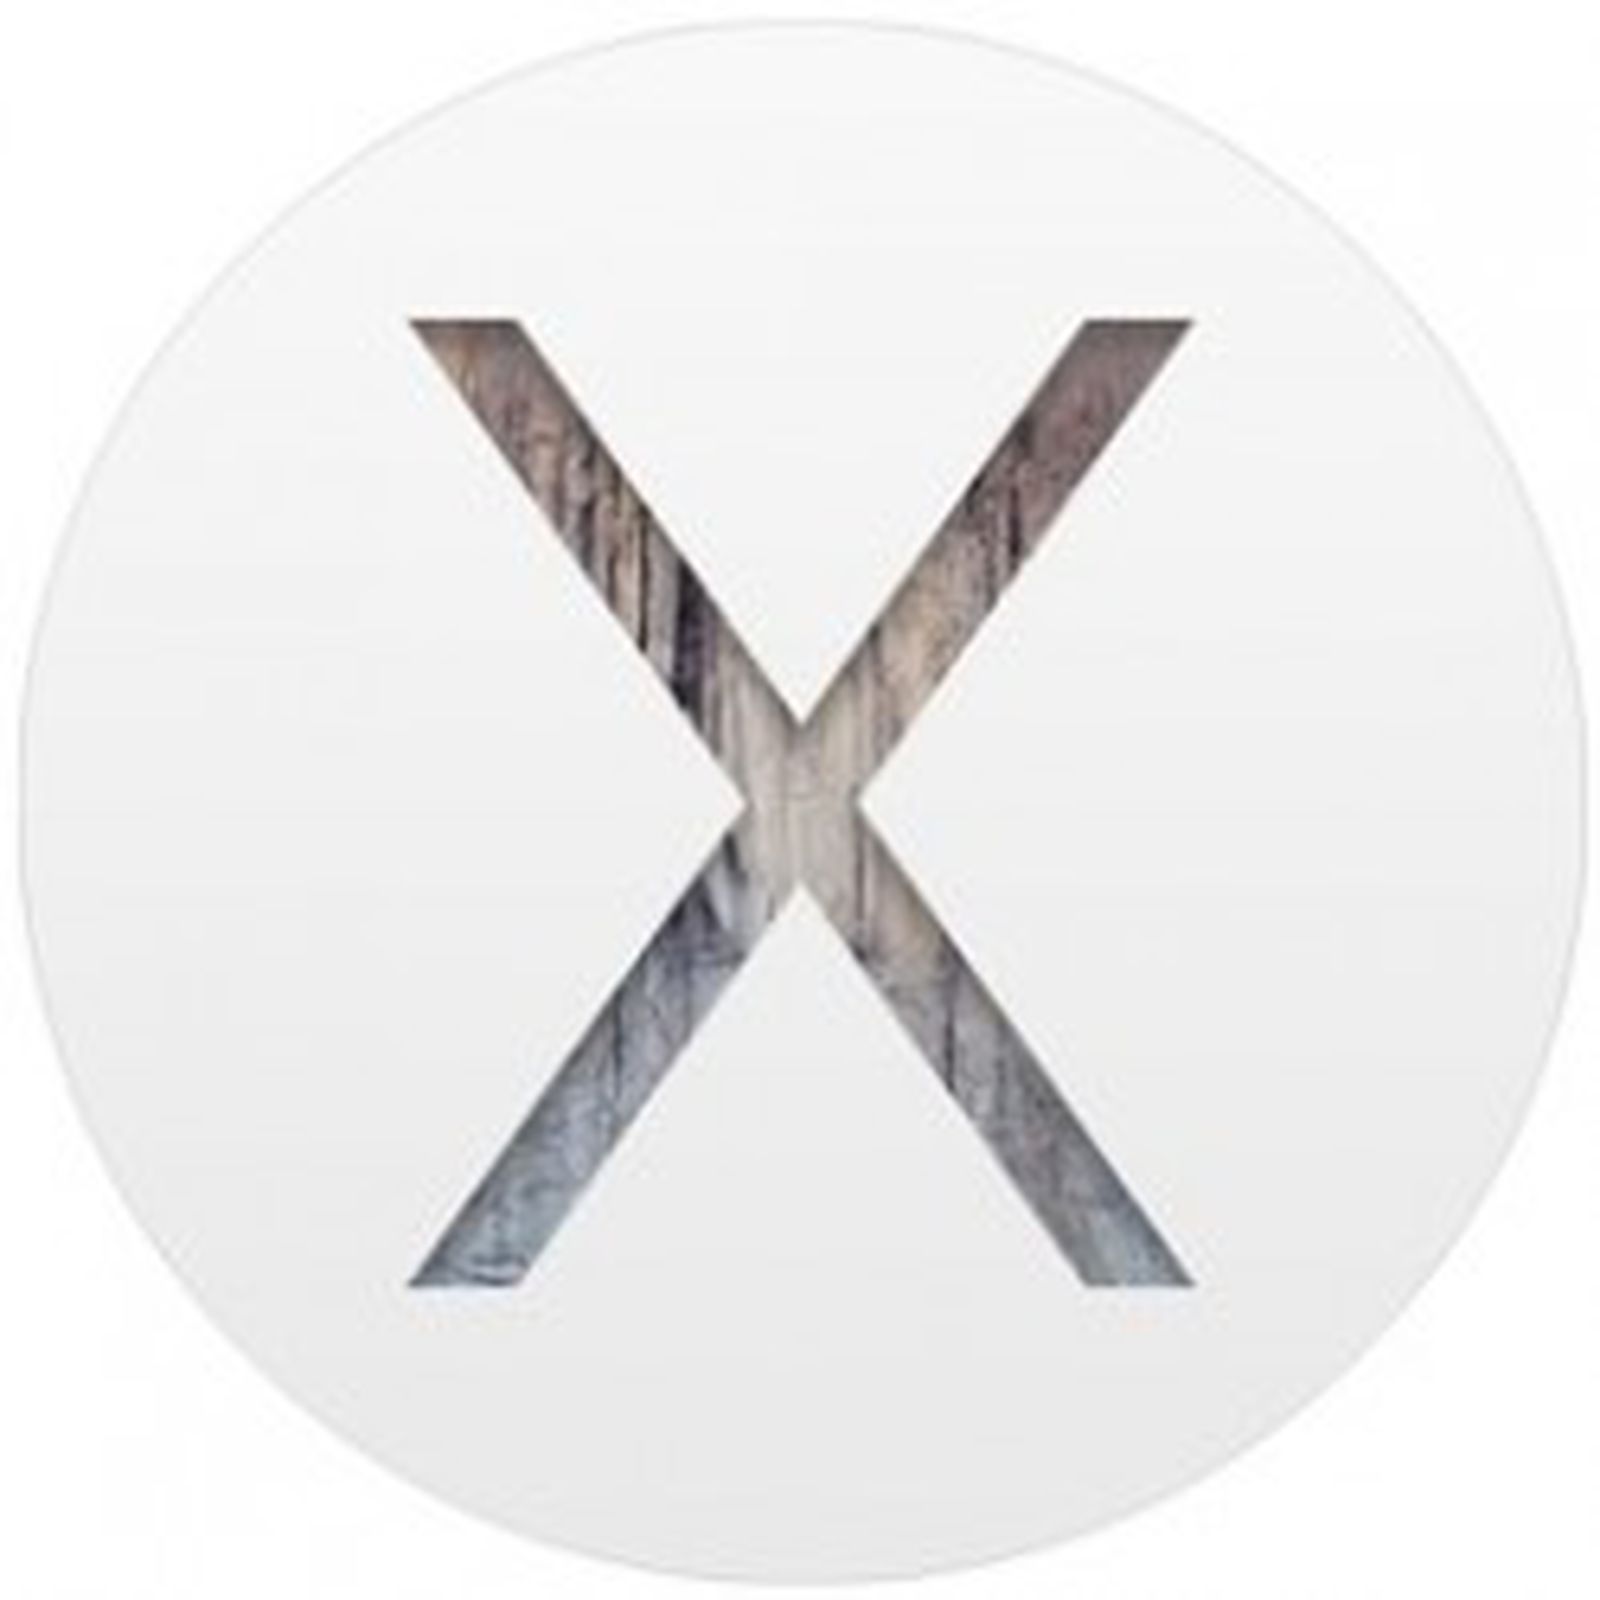 Steam Dropping Support for OS X 10.10 Yosemite and Earlier - MacRumors